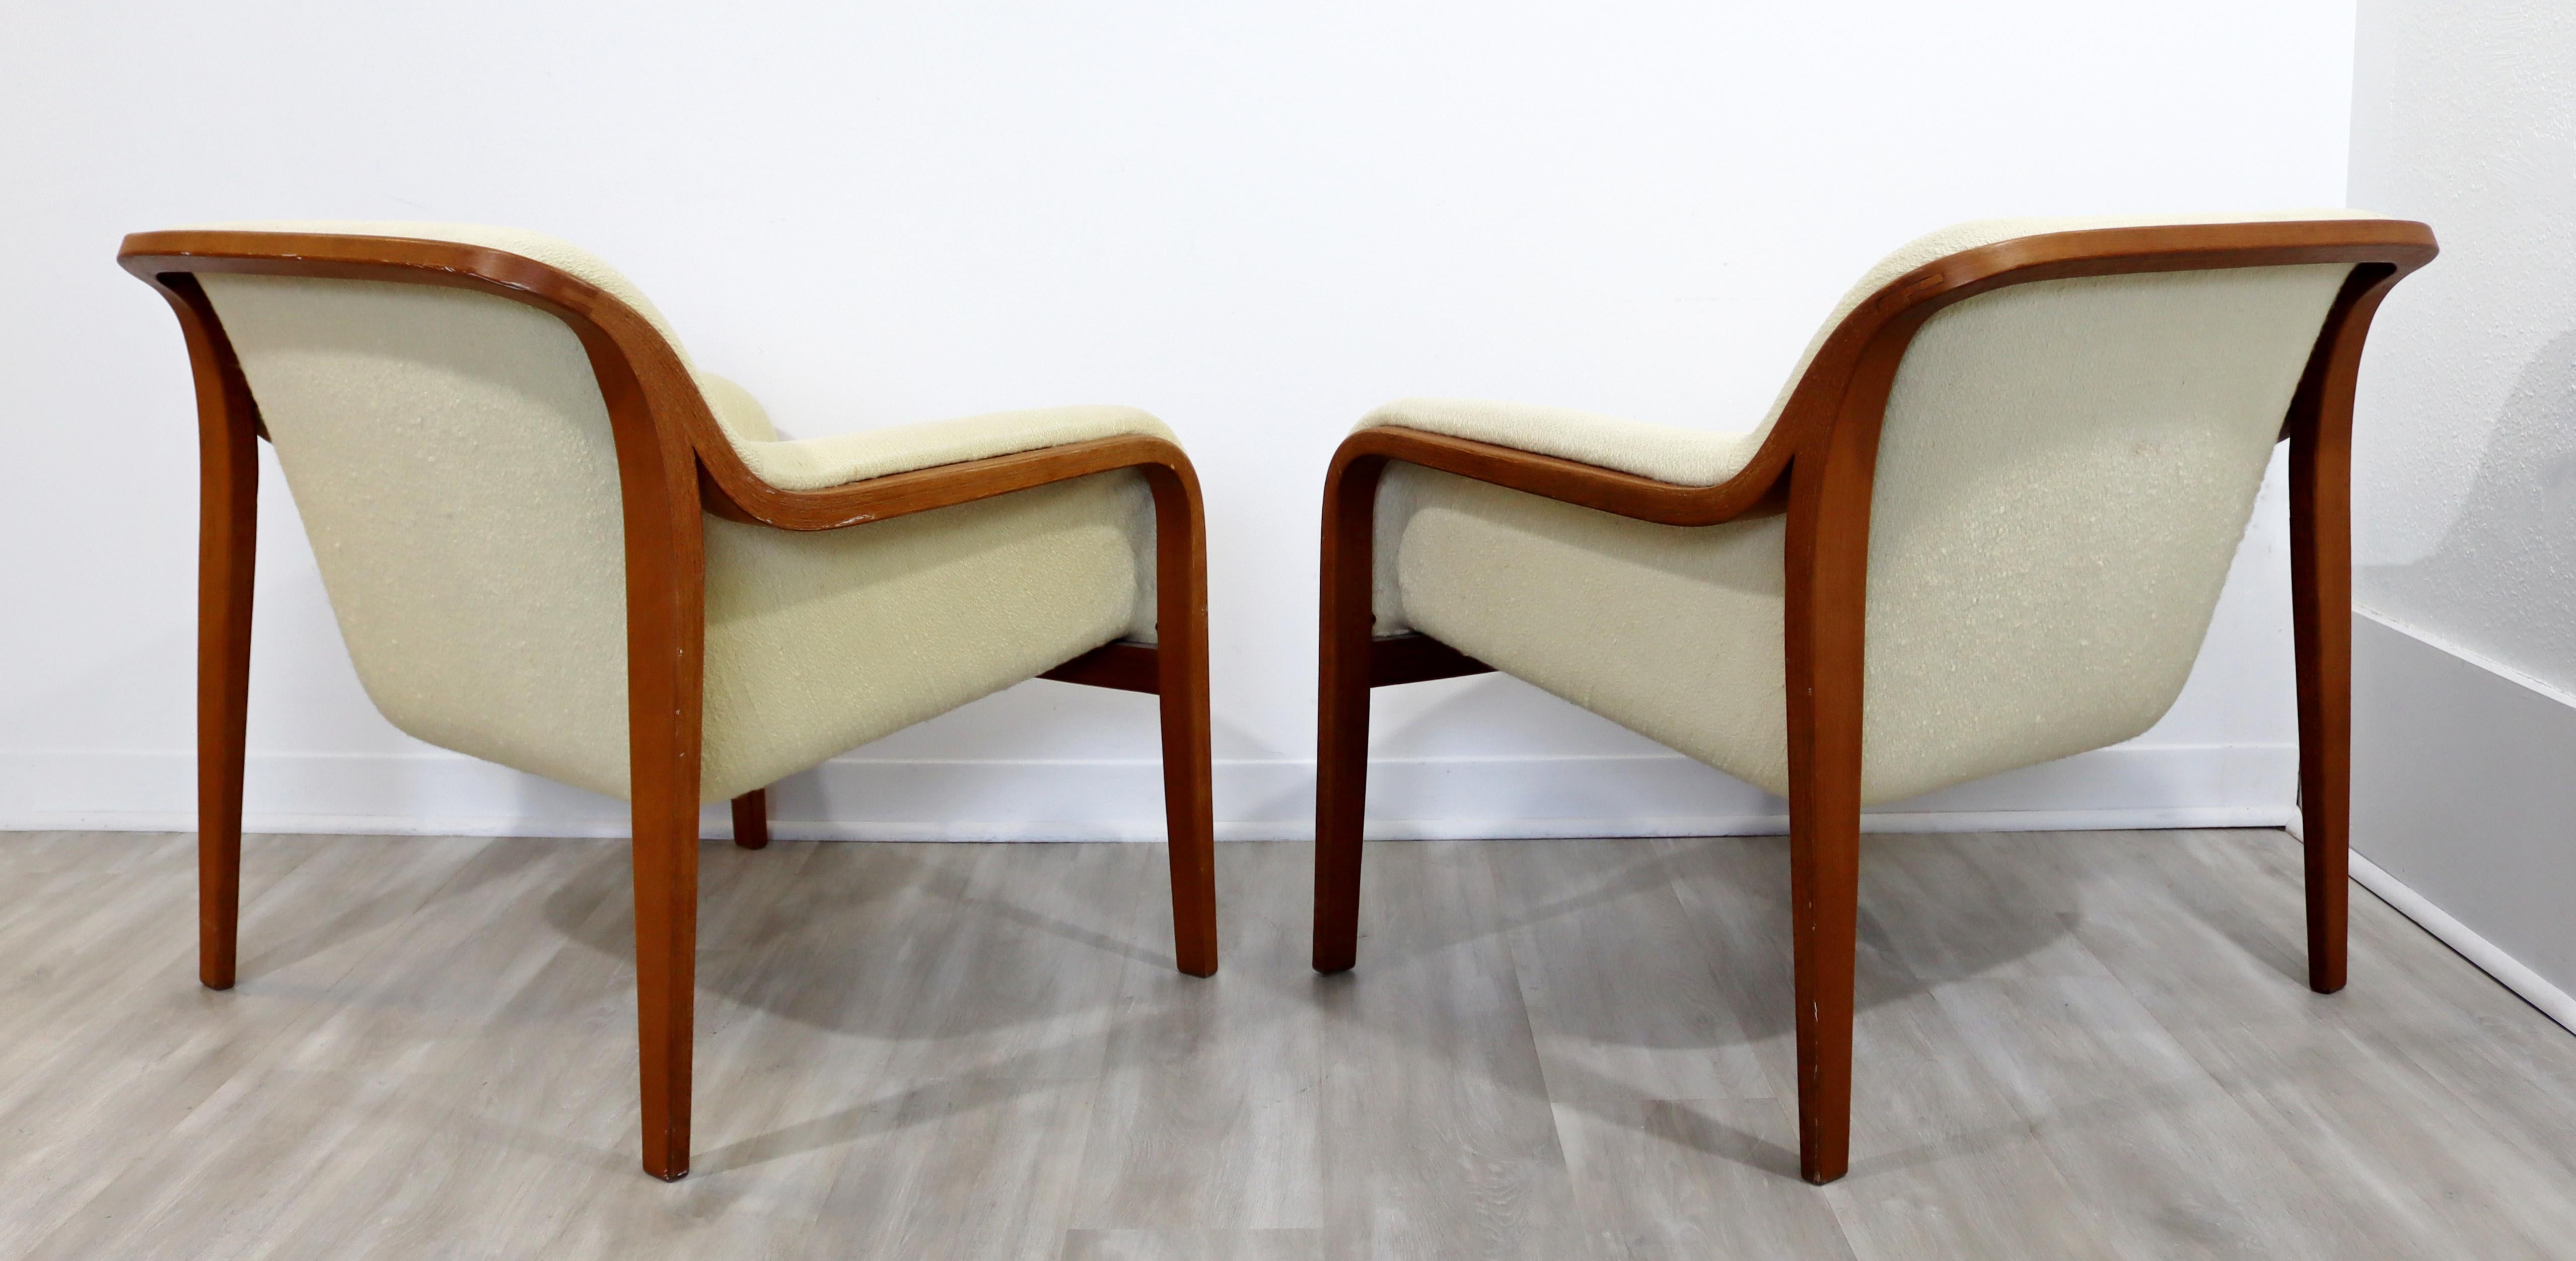 Late 20th Century Mid-Century Modern Pair Bentwood Lounge Chairs by Bill Stephens for Knoll 1970s